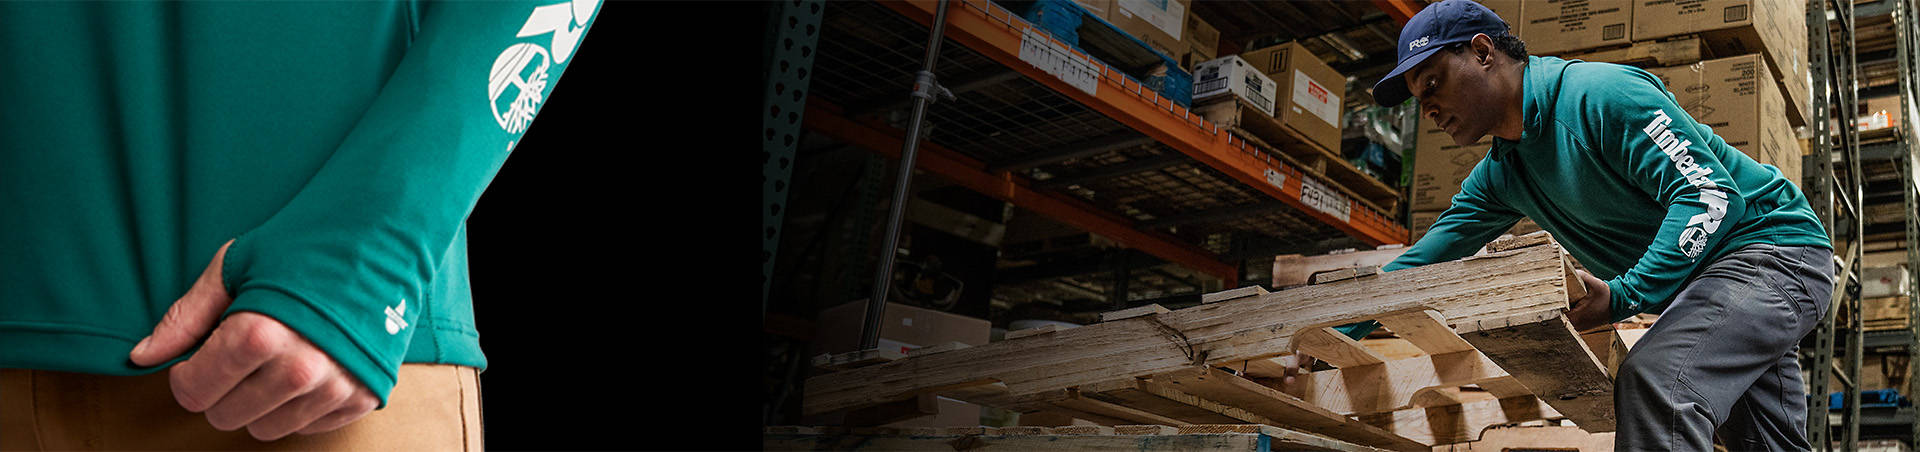 Image of a man in a lumber warehouse stacking pallets, with a lightweight blue Timberland logo hoodie, gray work pants and black work shoes.